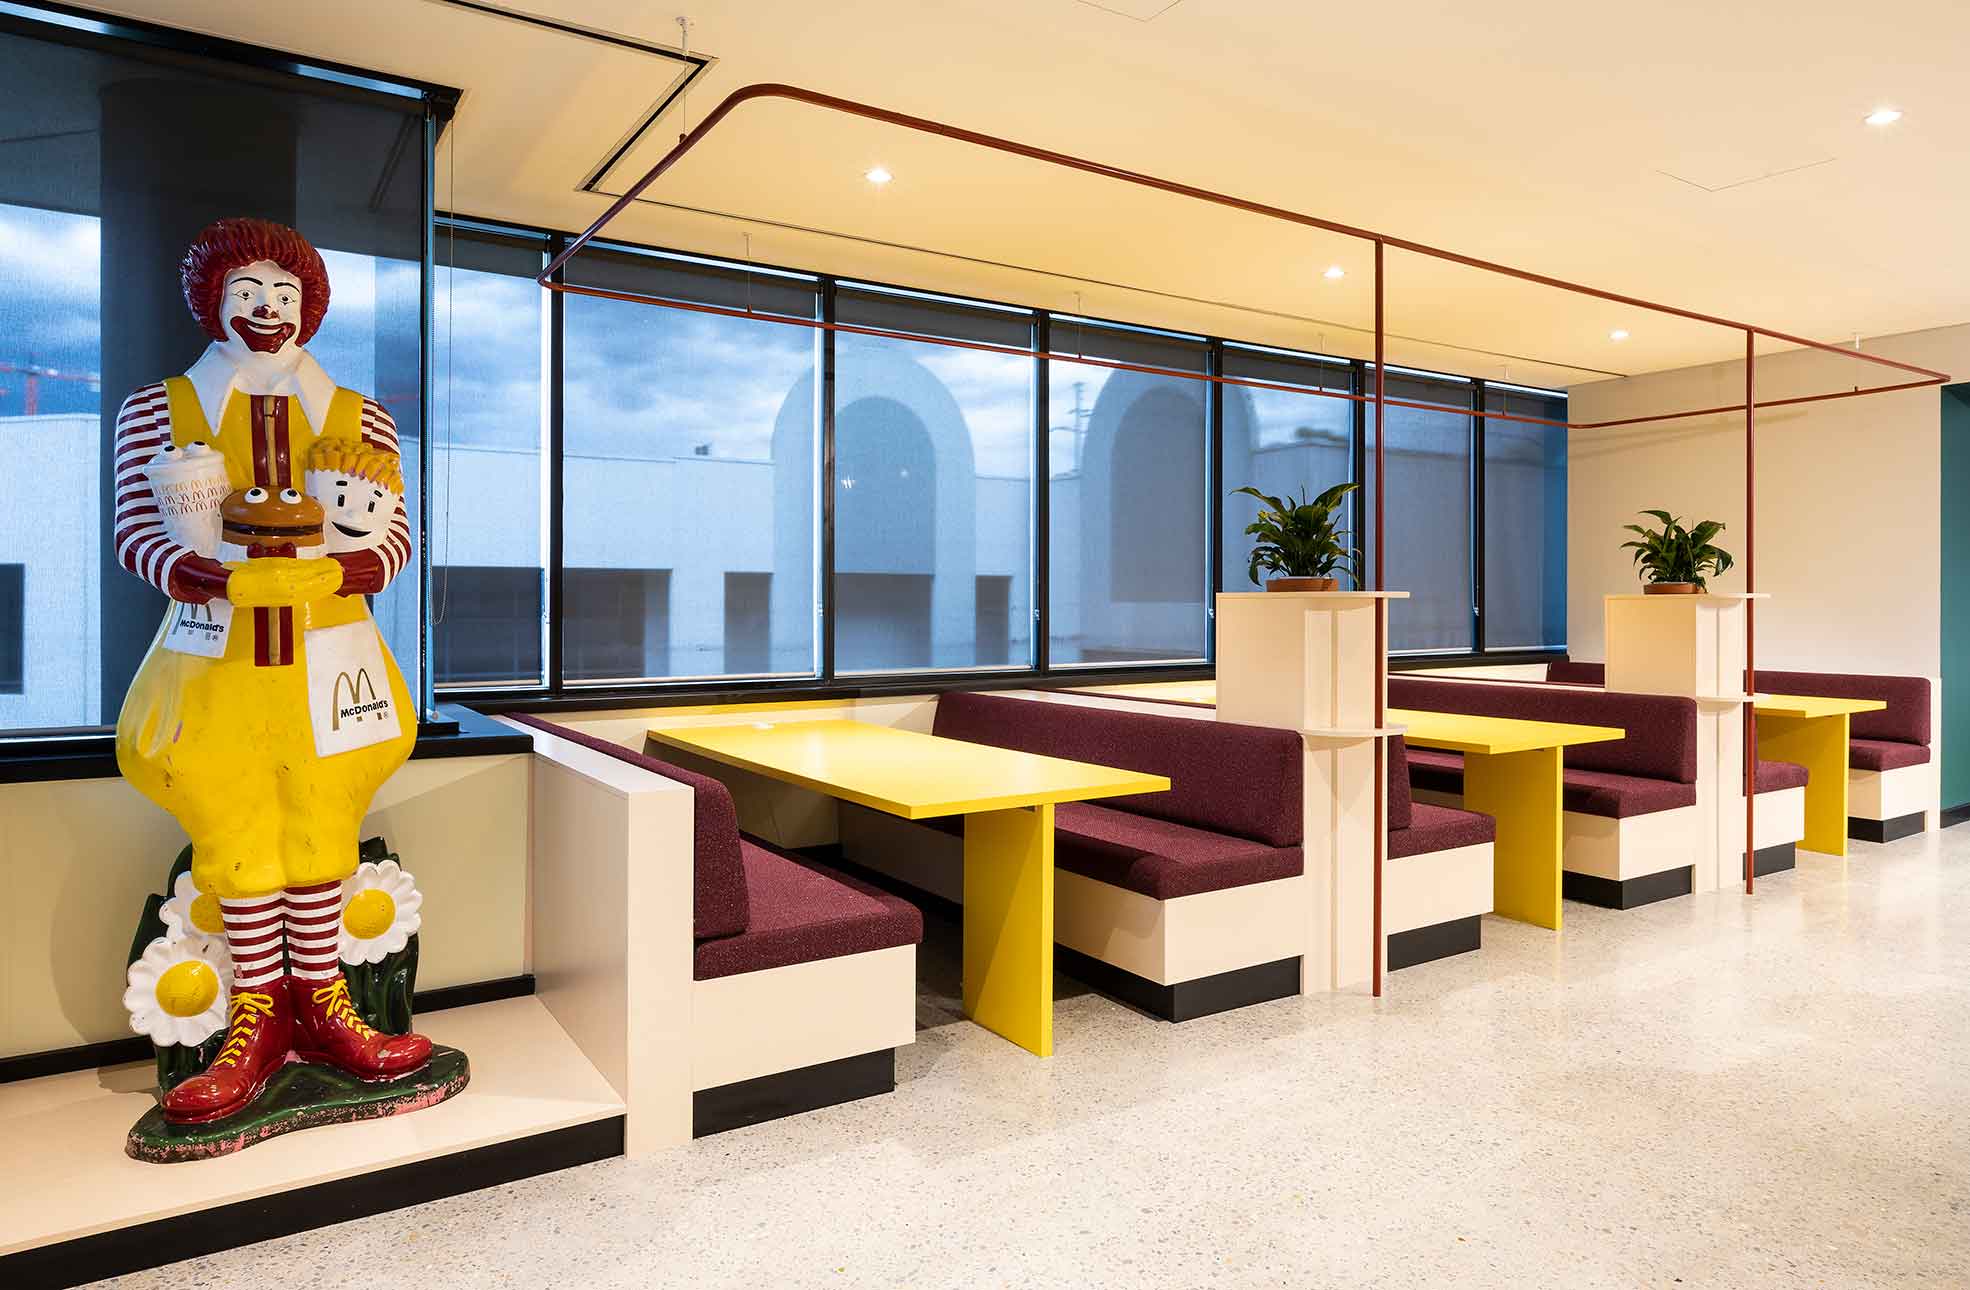 Office refurbishment with Ronald McDonald and restaurant style seating